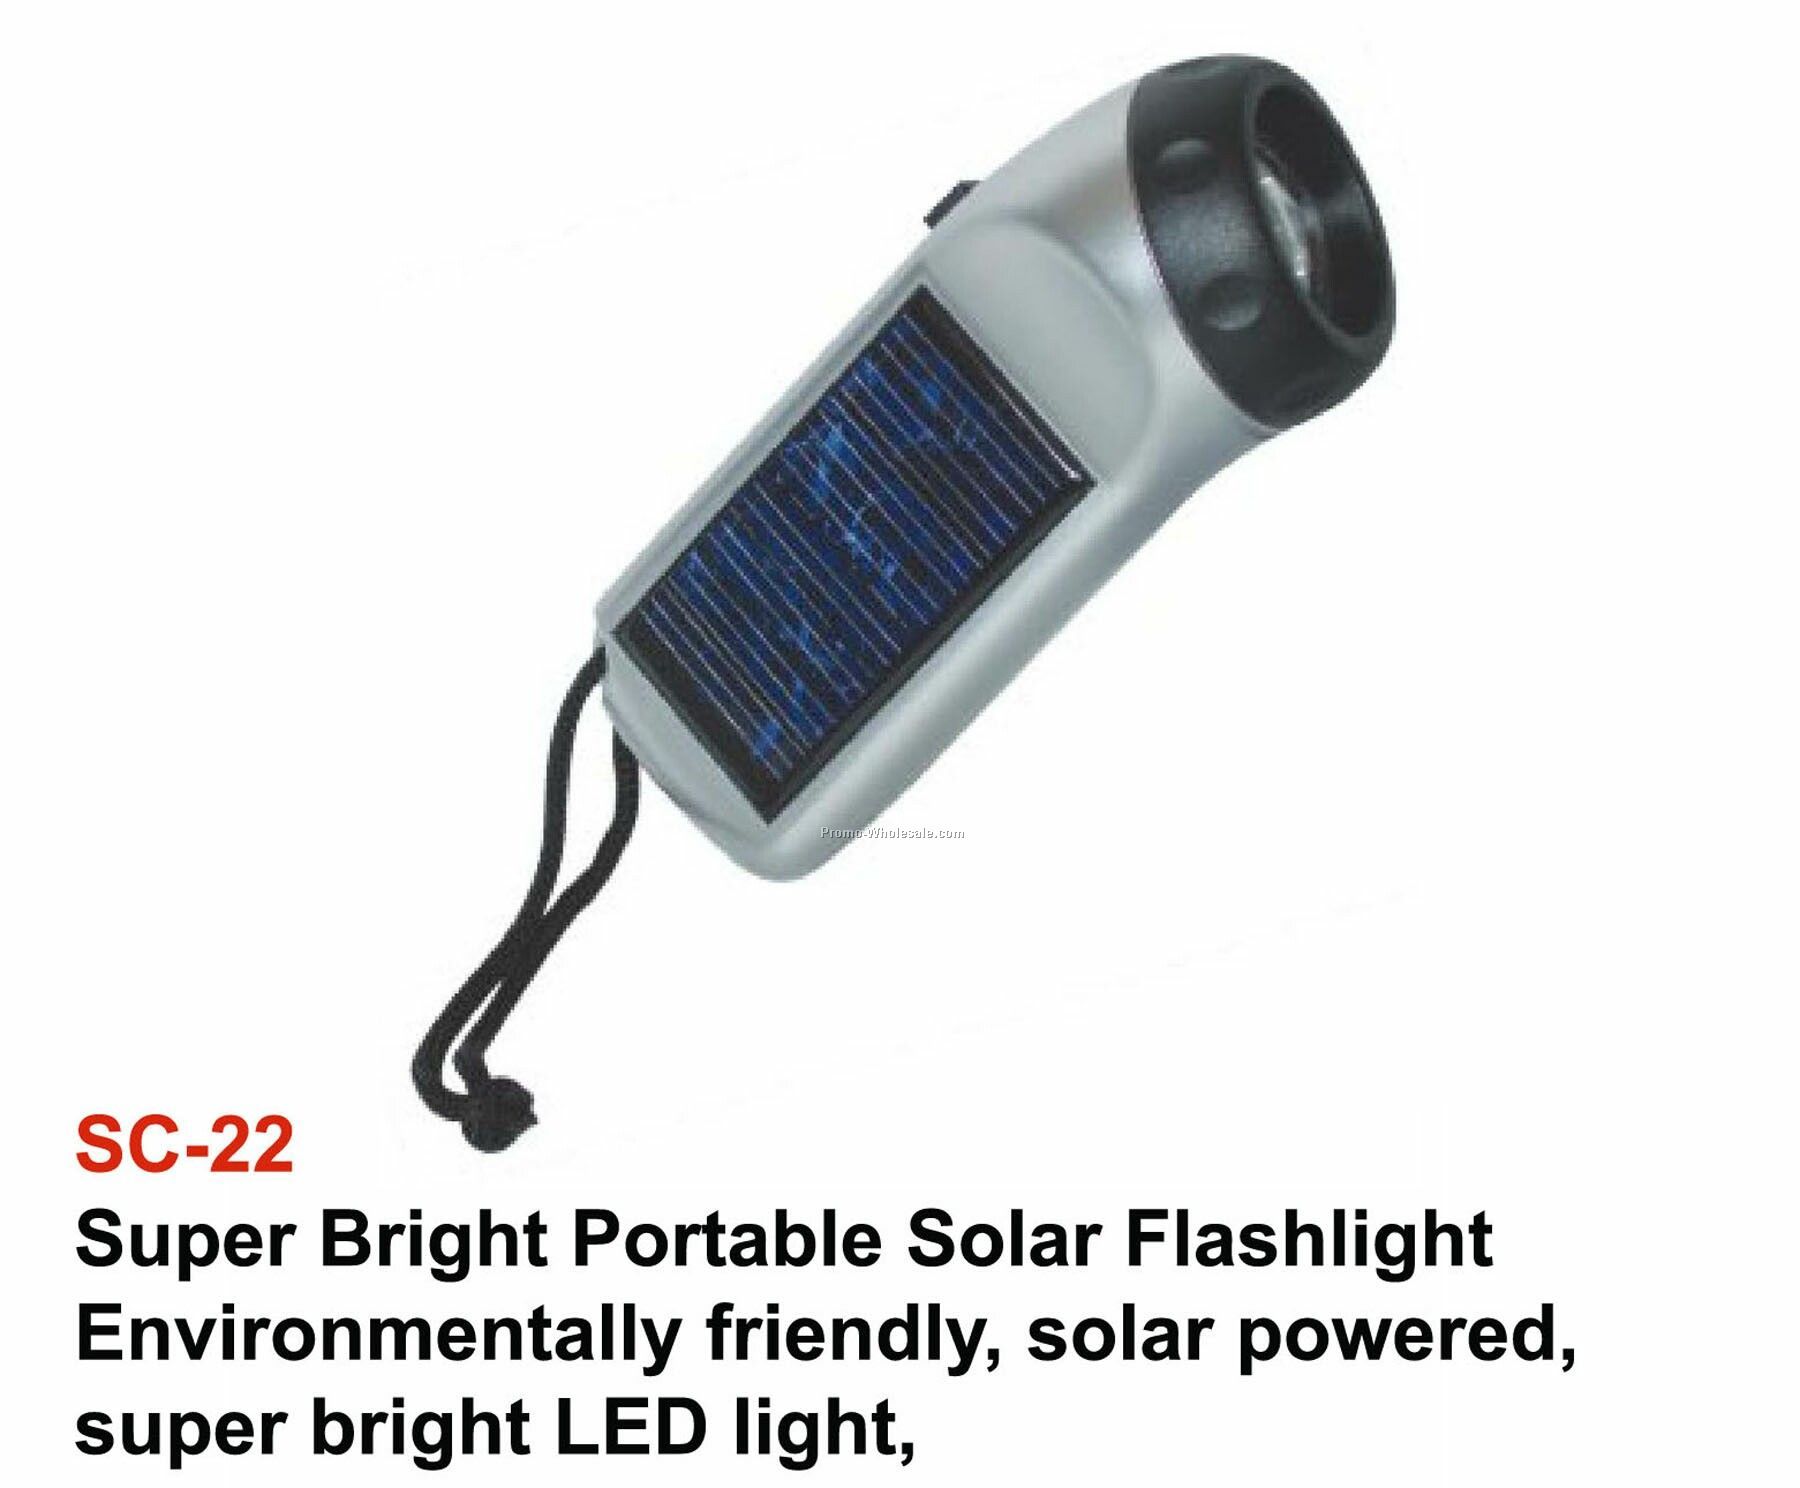 Solar Flashlight. White LED Light. On/Off Switch. Rechargeable Batteries.